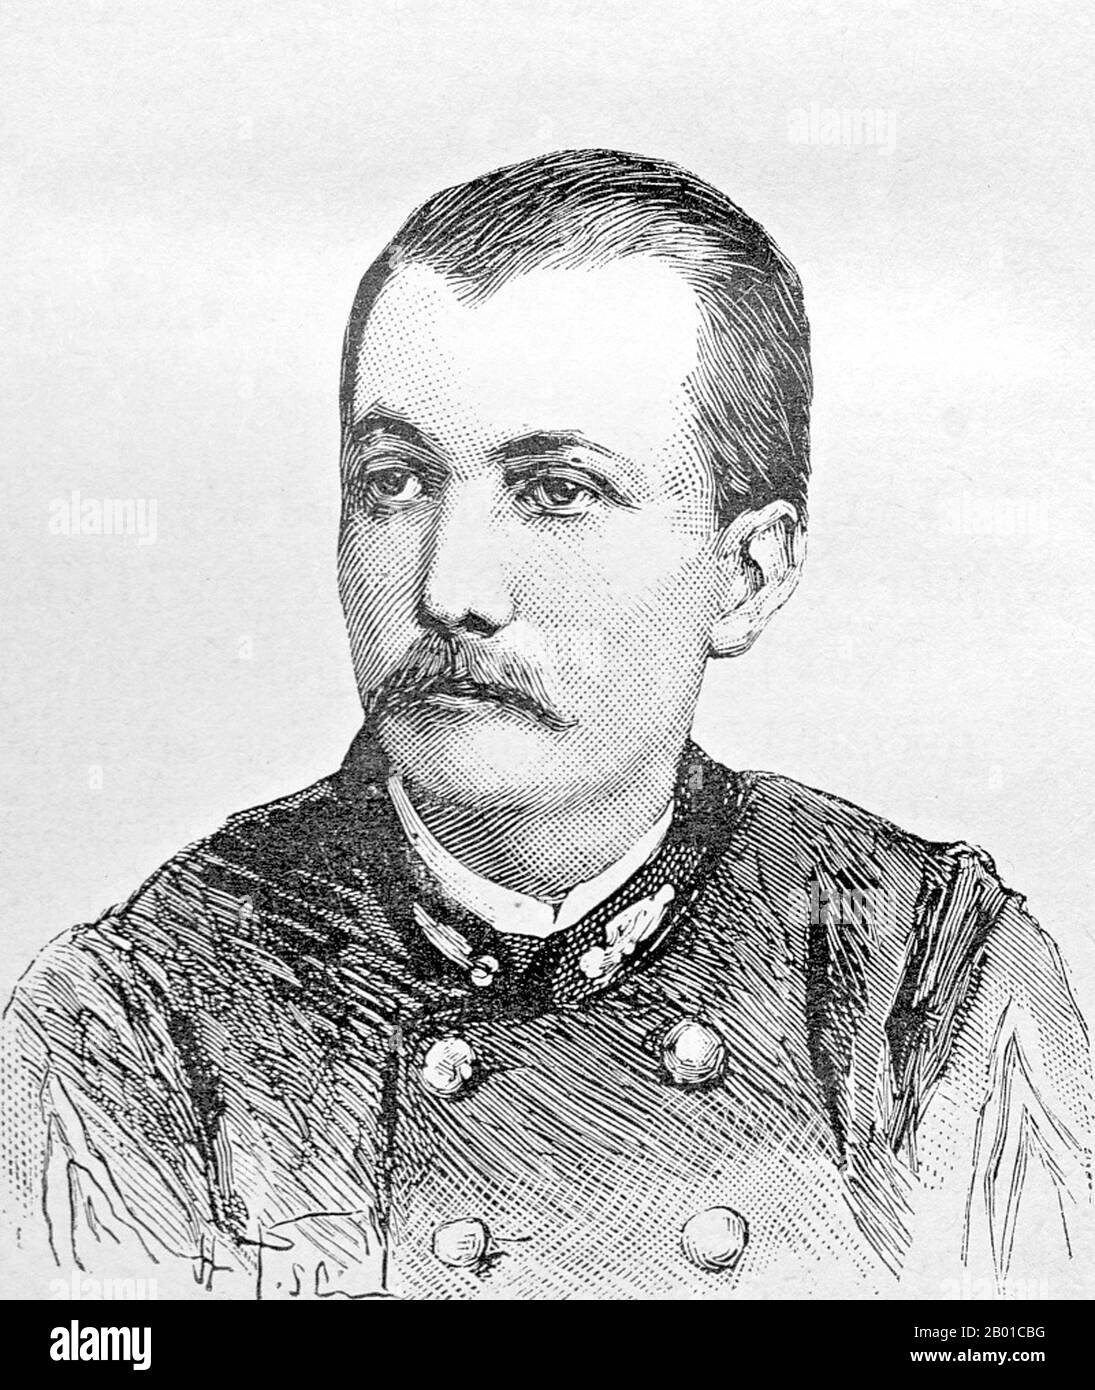 Vietnam: Captain Gravereau, 2nd Foreign Legion Battalion, killed in action at Tay Hoa, 4 February 1885. Lithograph portrait by Charles-Lucien Huard (12 February 1837 - 22 January 1899), 1887.  The Tonkin Campaign (French: Campagne du Tonkin) was an armed conflict fought between June 1883 and April 1886 by the French against, variously, the Vietnamese, Liu Yongfu's Black Flag Army and the Chinese Guangxi and Yunnan armies to occupy Tonkin (northern Vietnam) and entrench a French protectorate there. Stock Photo